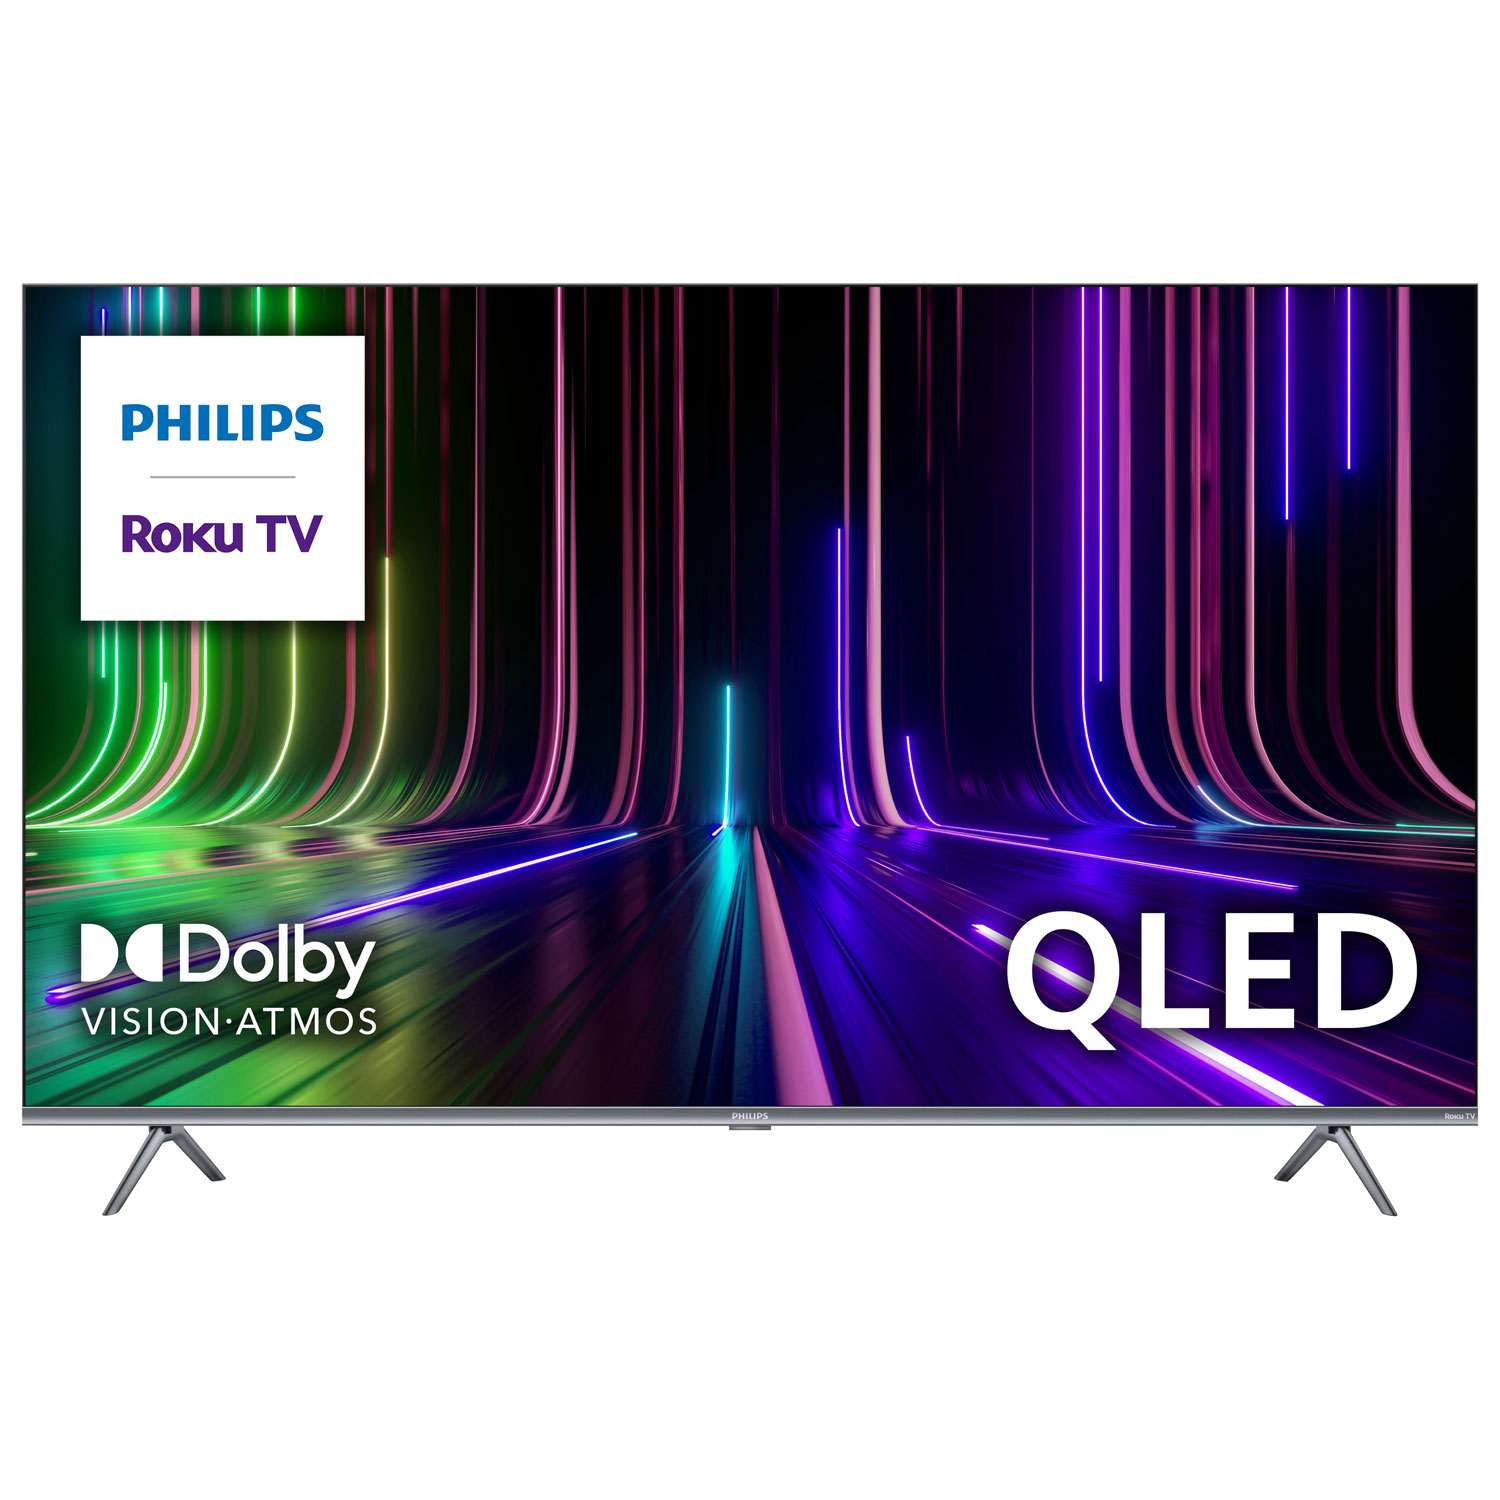 Philips 50" 4K UHD HDR QLED Roku Smart TV (50PUL7973/F6) - 2023 - Only at Best Buy